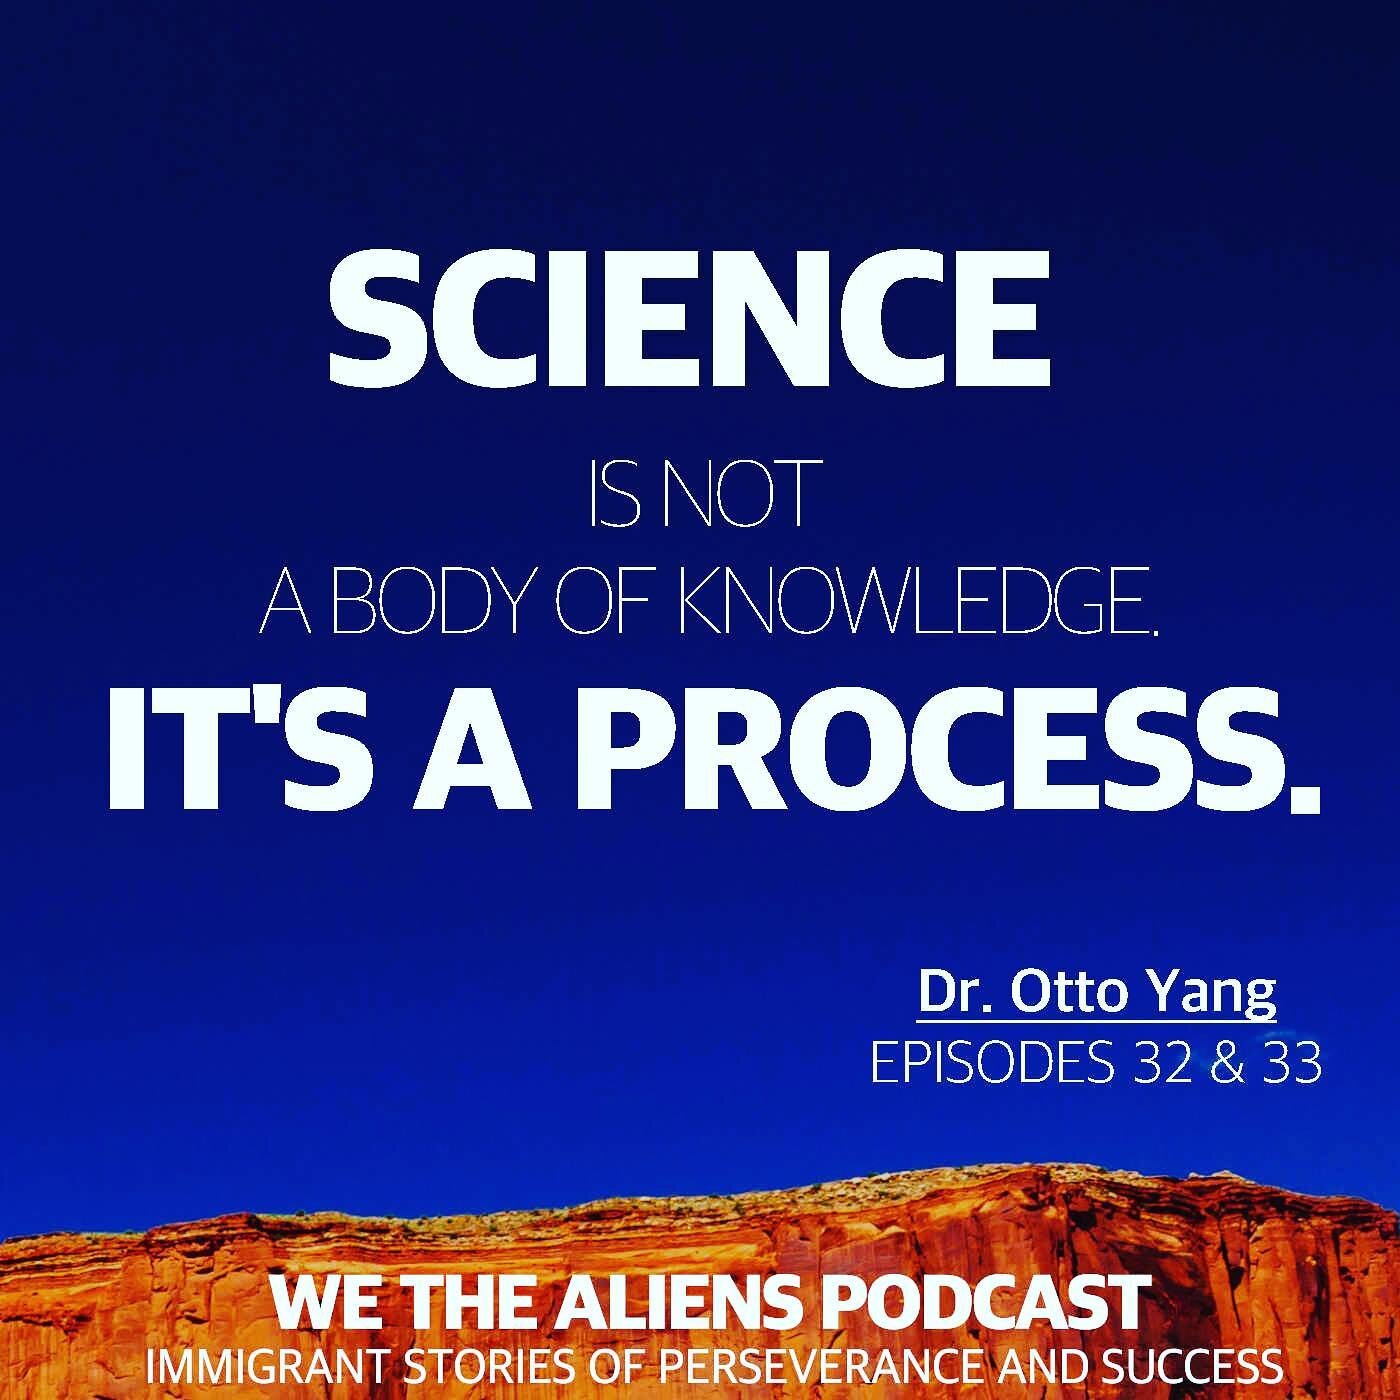 TRUSTING SCIENCE INCLUDES TRUSTING THAT THE SCIENCE WILL CHANGE.
.
.
.
This week on the podcast - 

Dr. Otto Yang is a first-generation Taiwanese-American and the Associate Chief of the Infectious Disease at UCLA. 
.
Dr. Yang has a background in clin